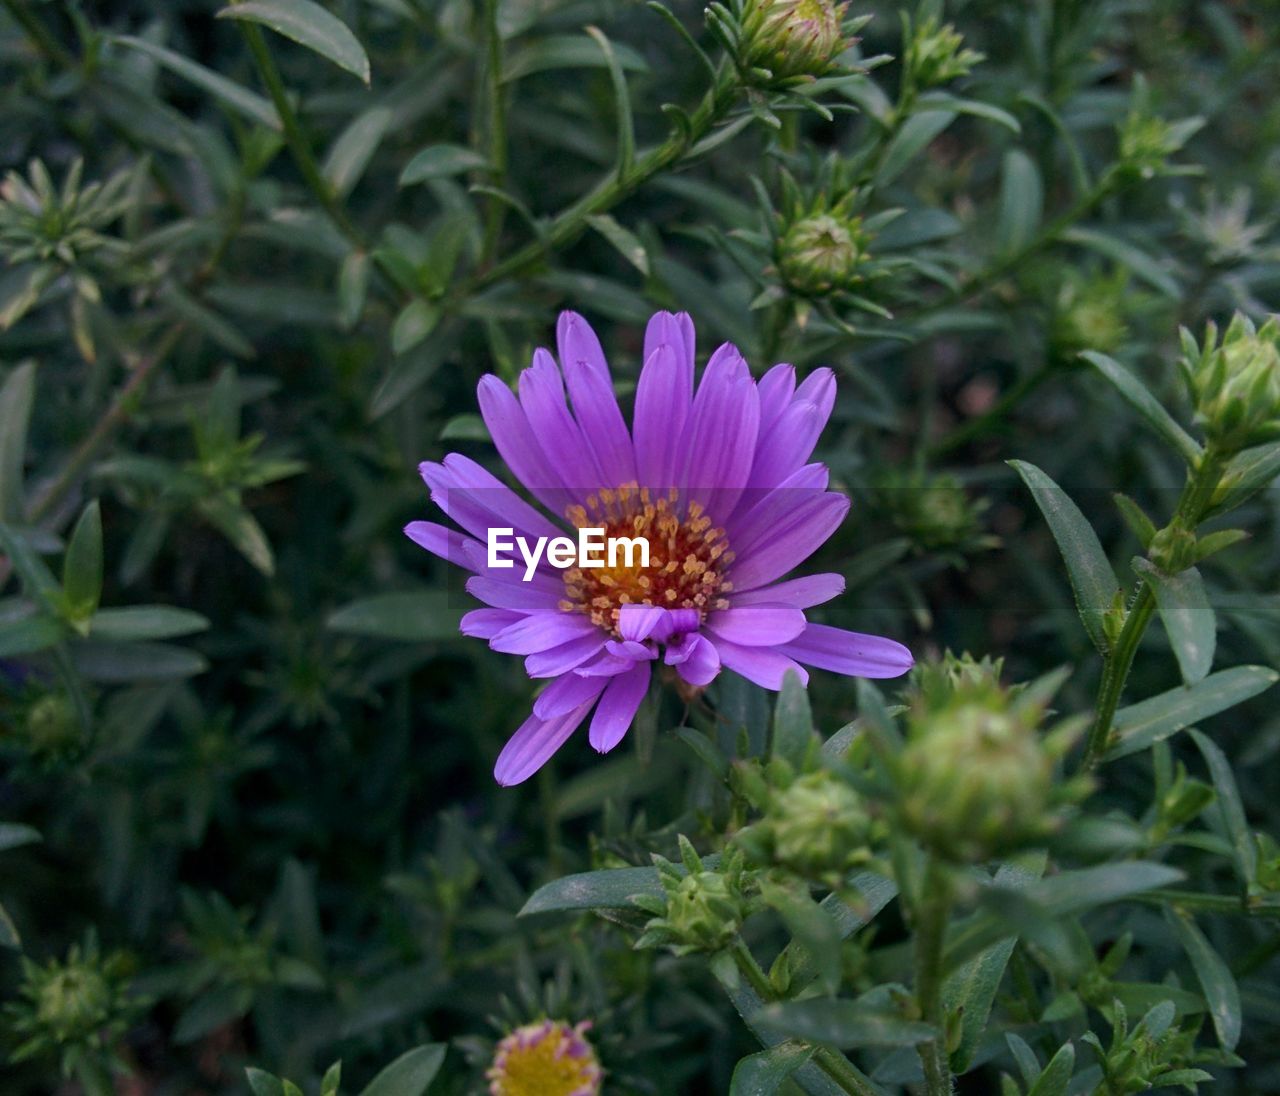 CLOSE-UP OF PURPLE FLOWER BLOOMING OUTDOORS